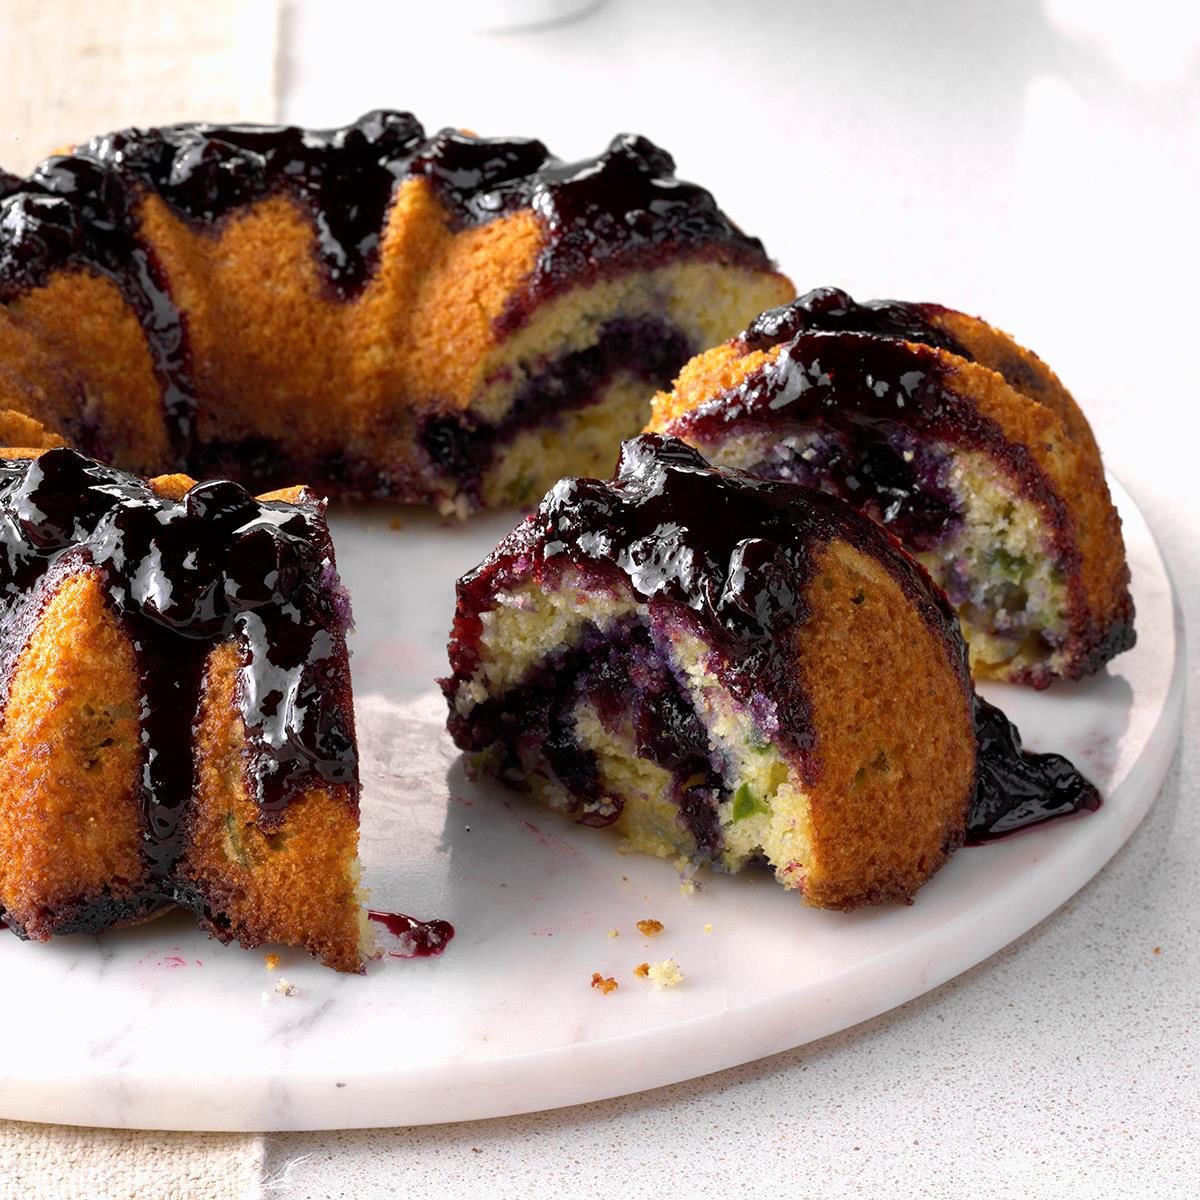 Jalapeno Cornbread Filled with Blueberry Quick Jam